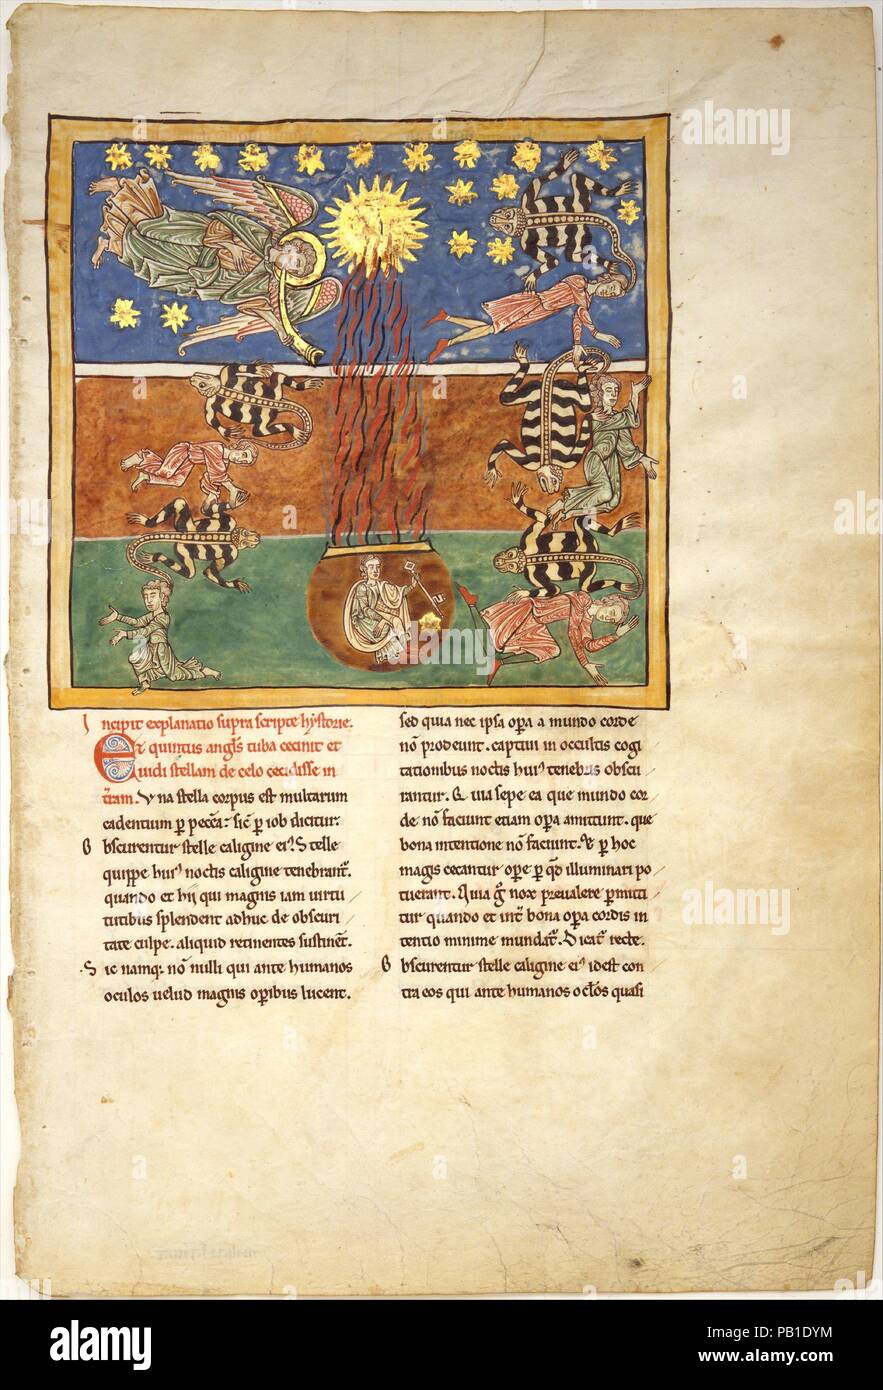 Leaf from a Beatus Manuscript: at the Clarion of the Fifth Angel's Trumpet, a Star Falls from the Sky; the Bottomless Pit is Opened with a Key; Emerging from the Smoke, Locusts Come Upon the Earth and Torment the Deathless. Culture: Spanish. Dimensions: Overall (folio): 17 1/2 x 11 13/16 in. (44.5 x 30 cm)  Mat: 22 x 16 in. (55.9 x 40.6 cm). Date: ca. 1180.  Illustrated Beatus manuscripts bring to life an extraordinary vision of the end of the world, as recorded by Saint John in the Apocalypse (Book of Revelation) and filtered through the lens of Beatus of Liébana, an eighth-century Asturian m Stock Photo